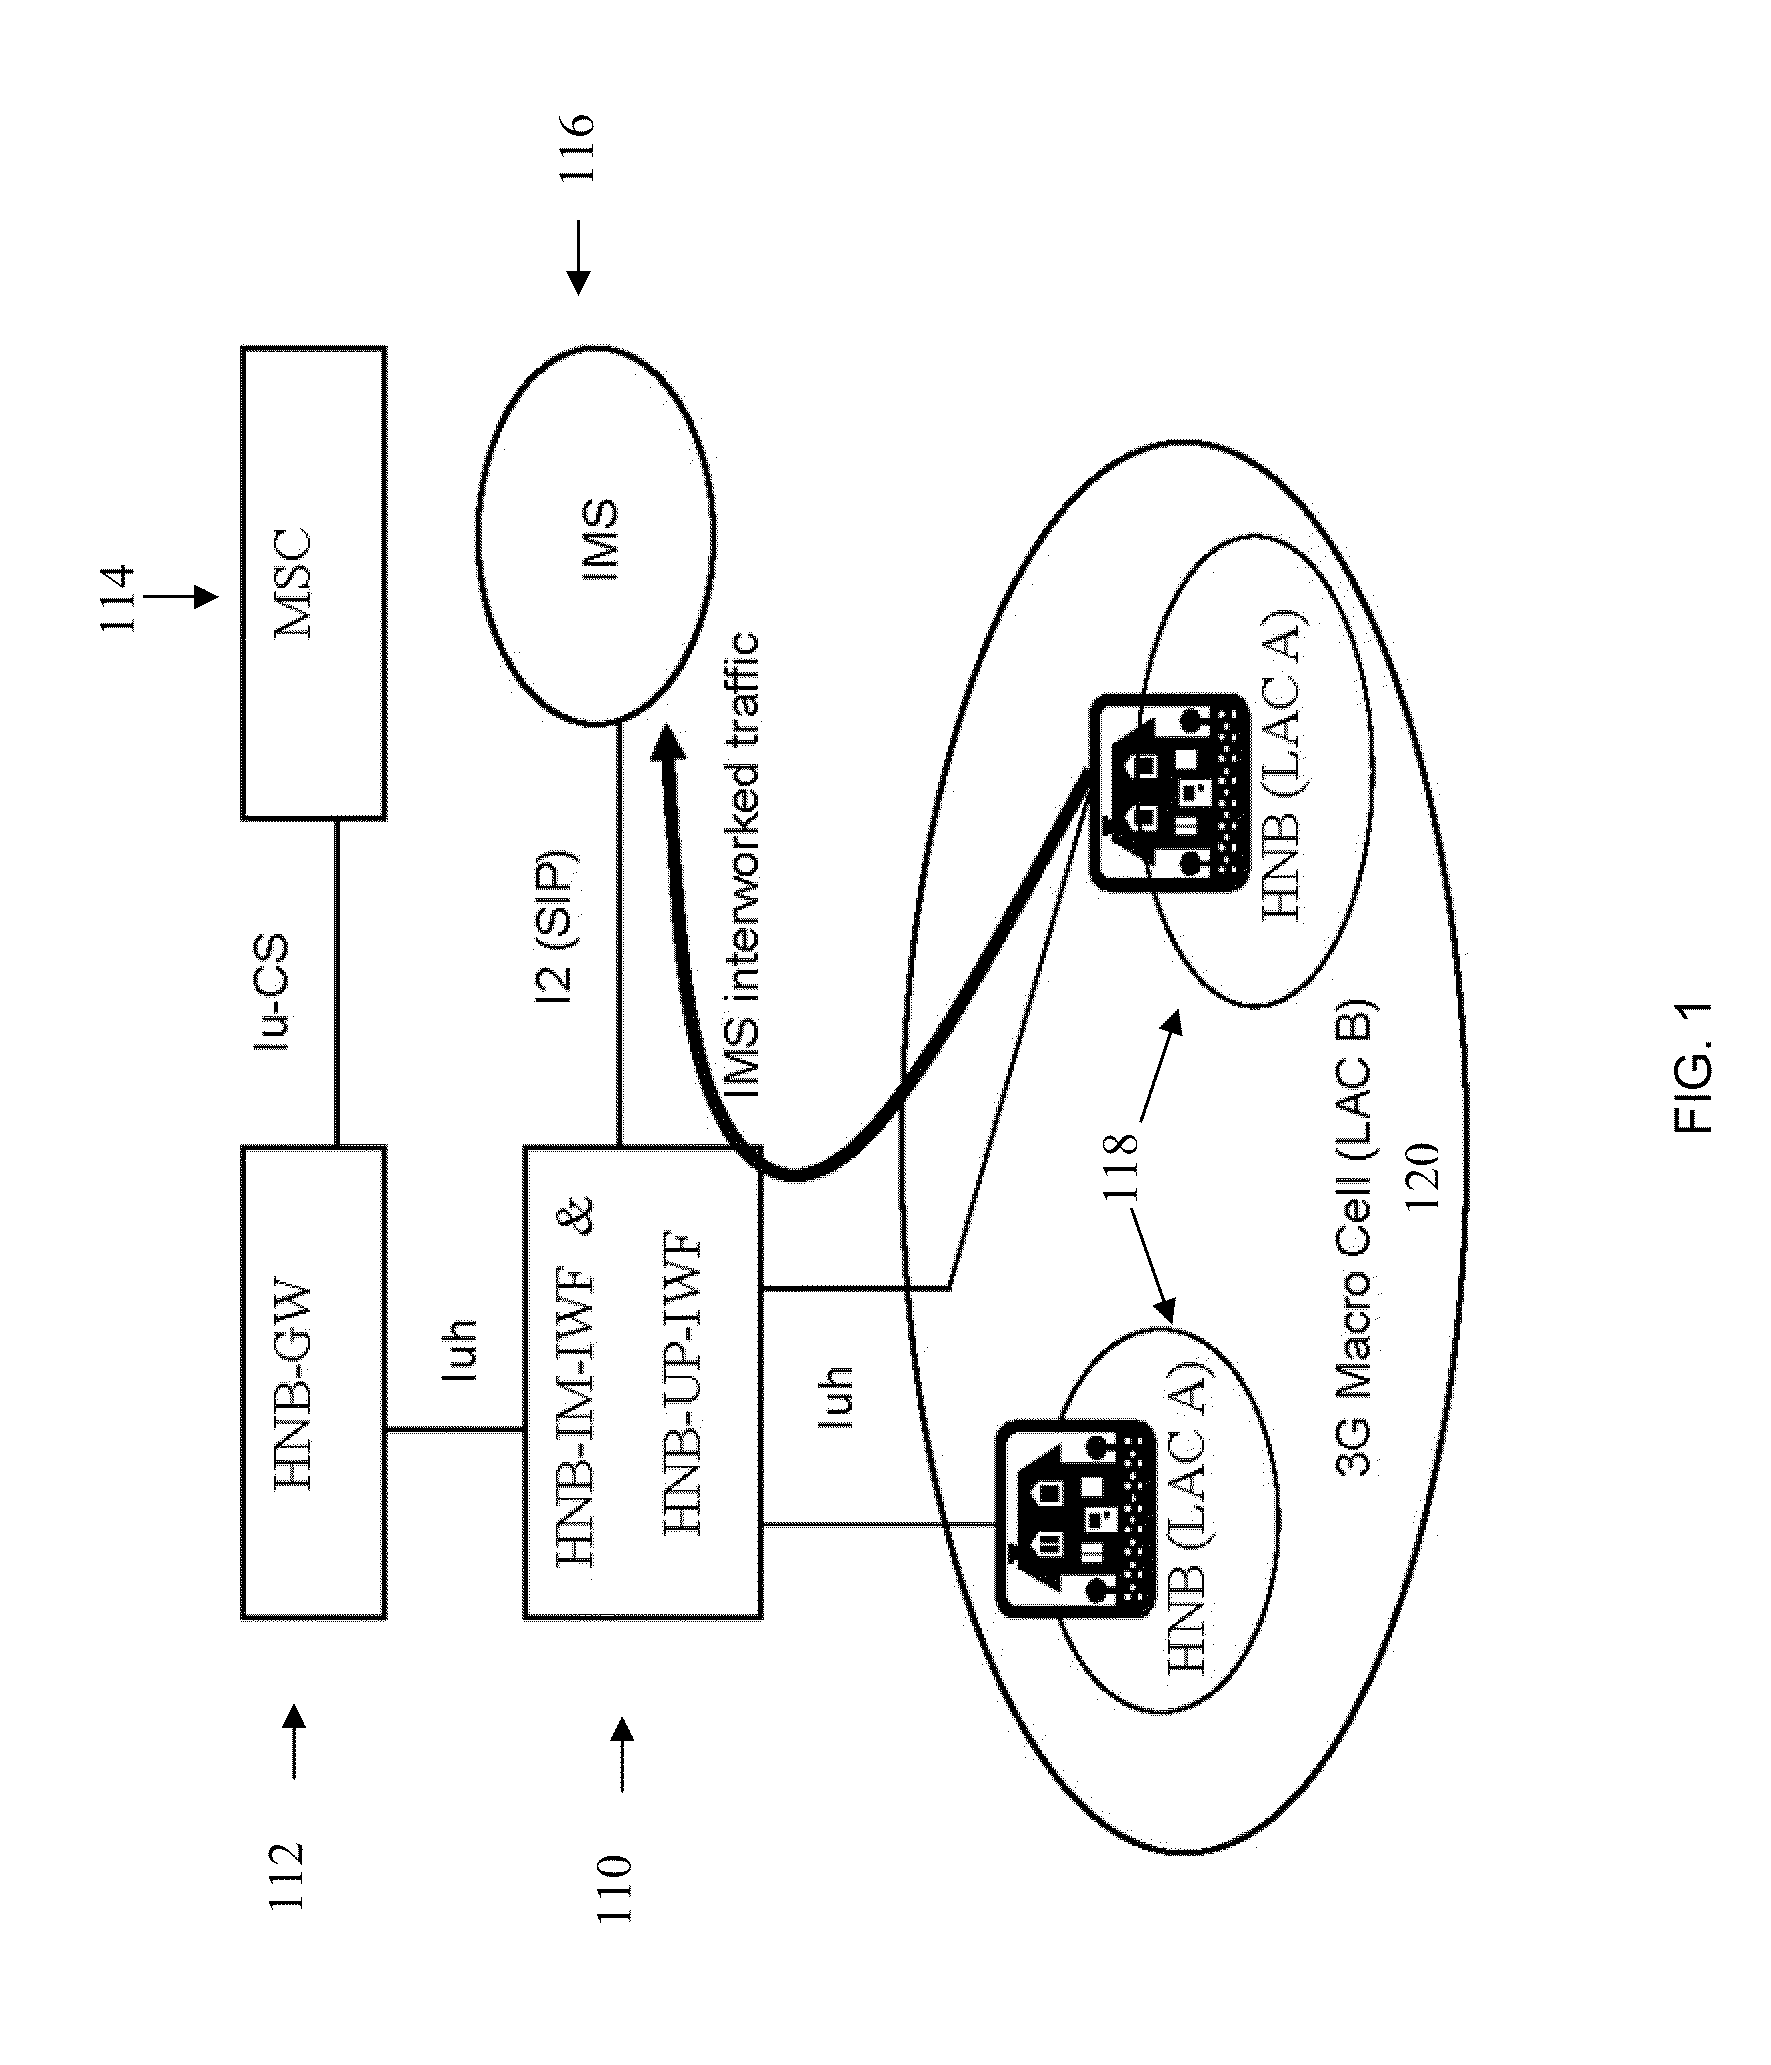 System and method for femto coverage in a wireless network